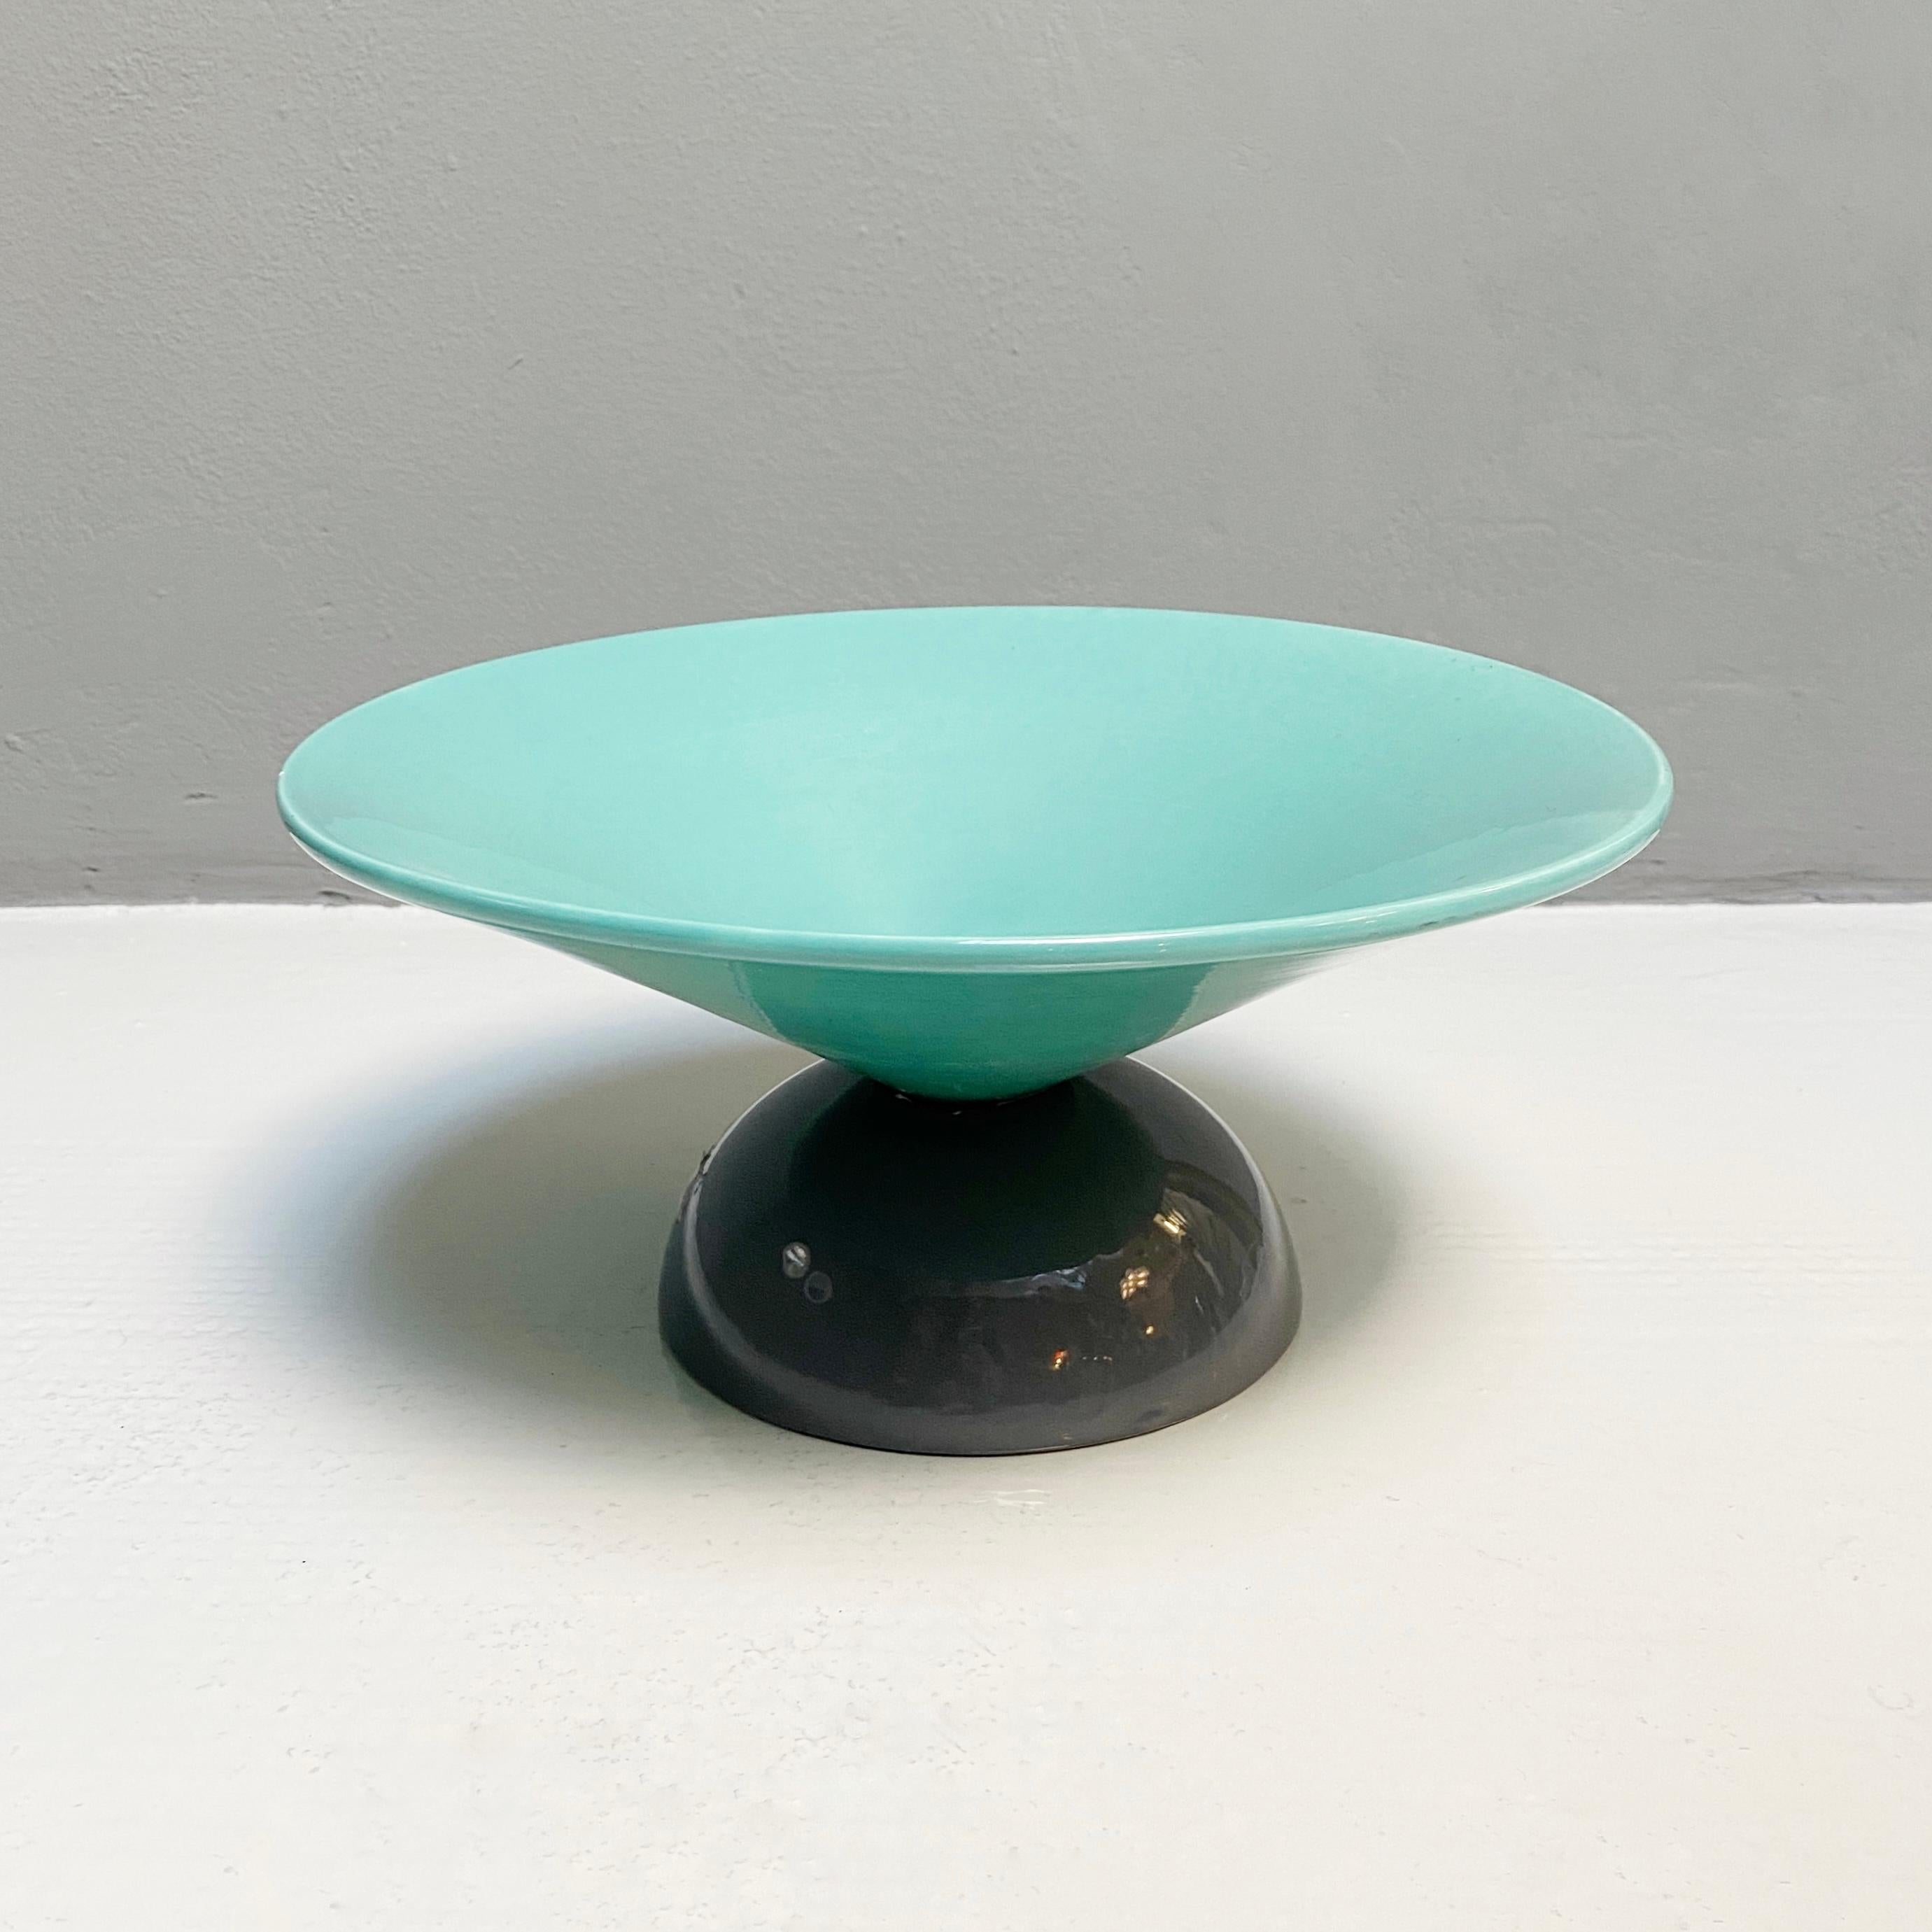 Ceramic centerpiece by Baldelli, 1990s
Centerpiece in glazed ceramic composed of a teal conical structure on a gray hemisphere. Made by Baldelli in the 1990s.

Good condition, some signs of wear.

Measurements in cm 35x17h.